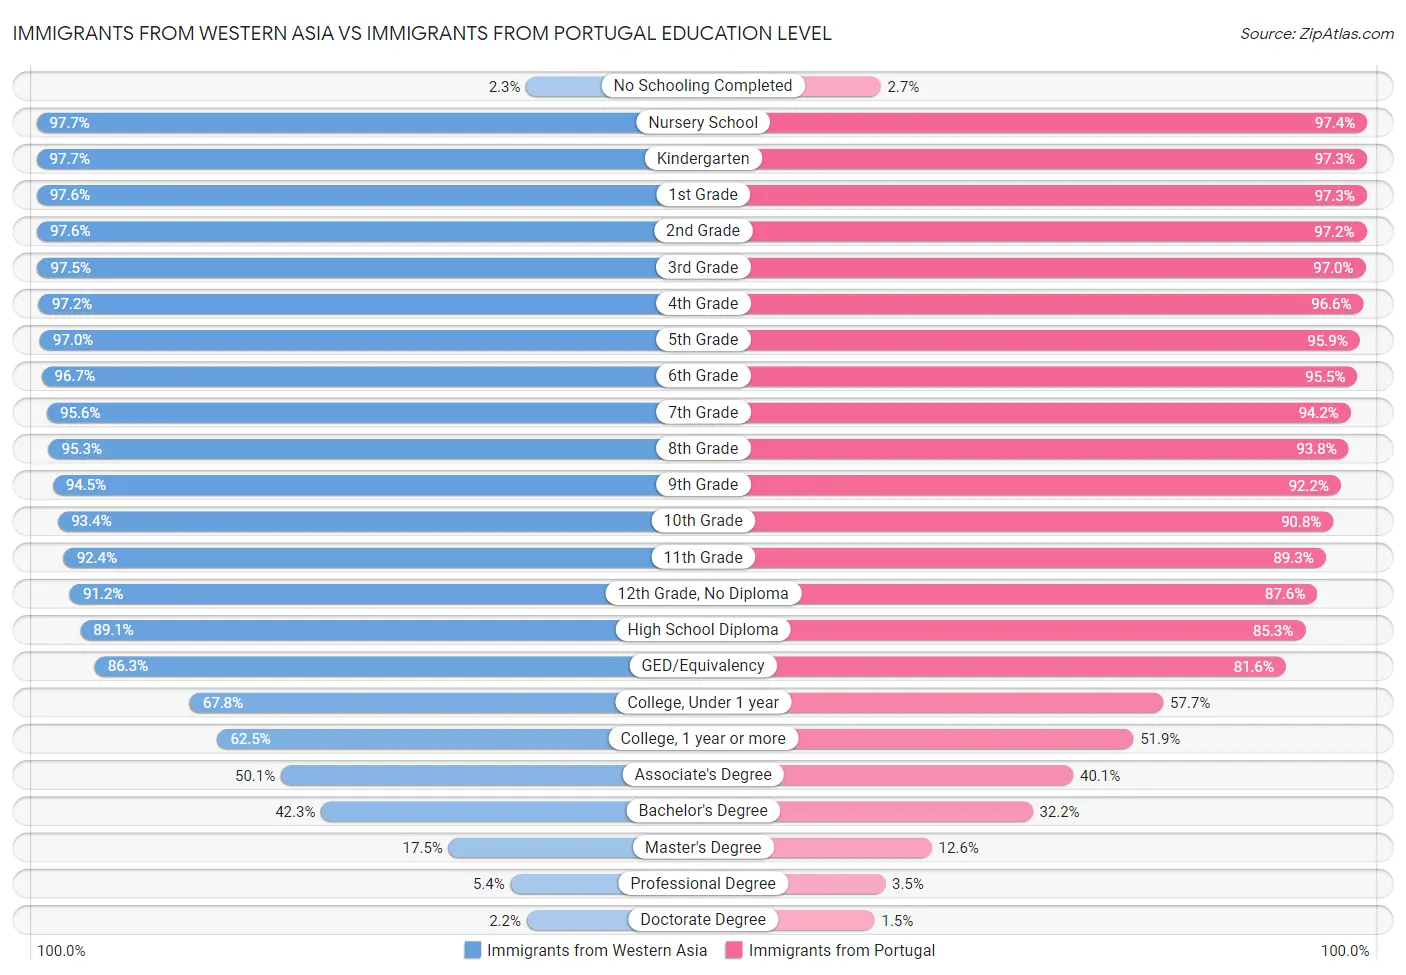 Immigrants from Western Asia vs Immigrants from Portugal Education Level